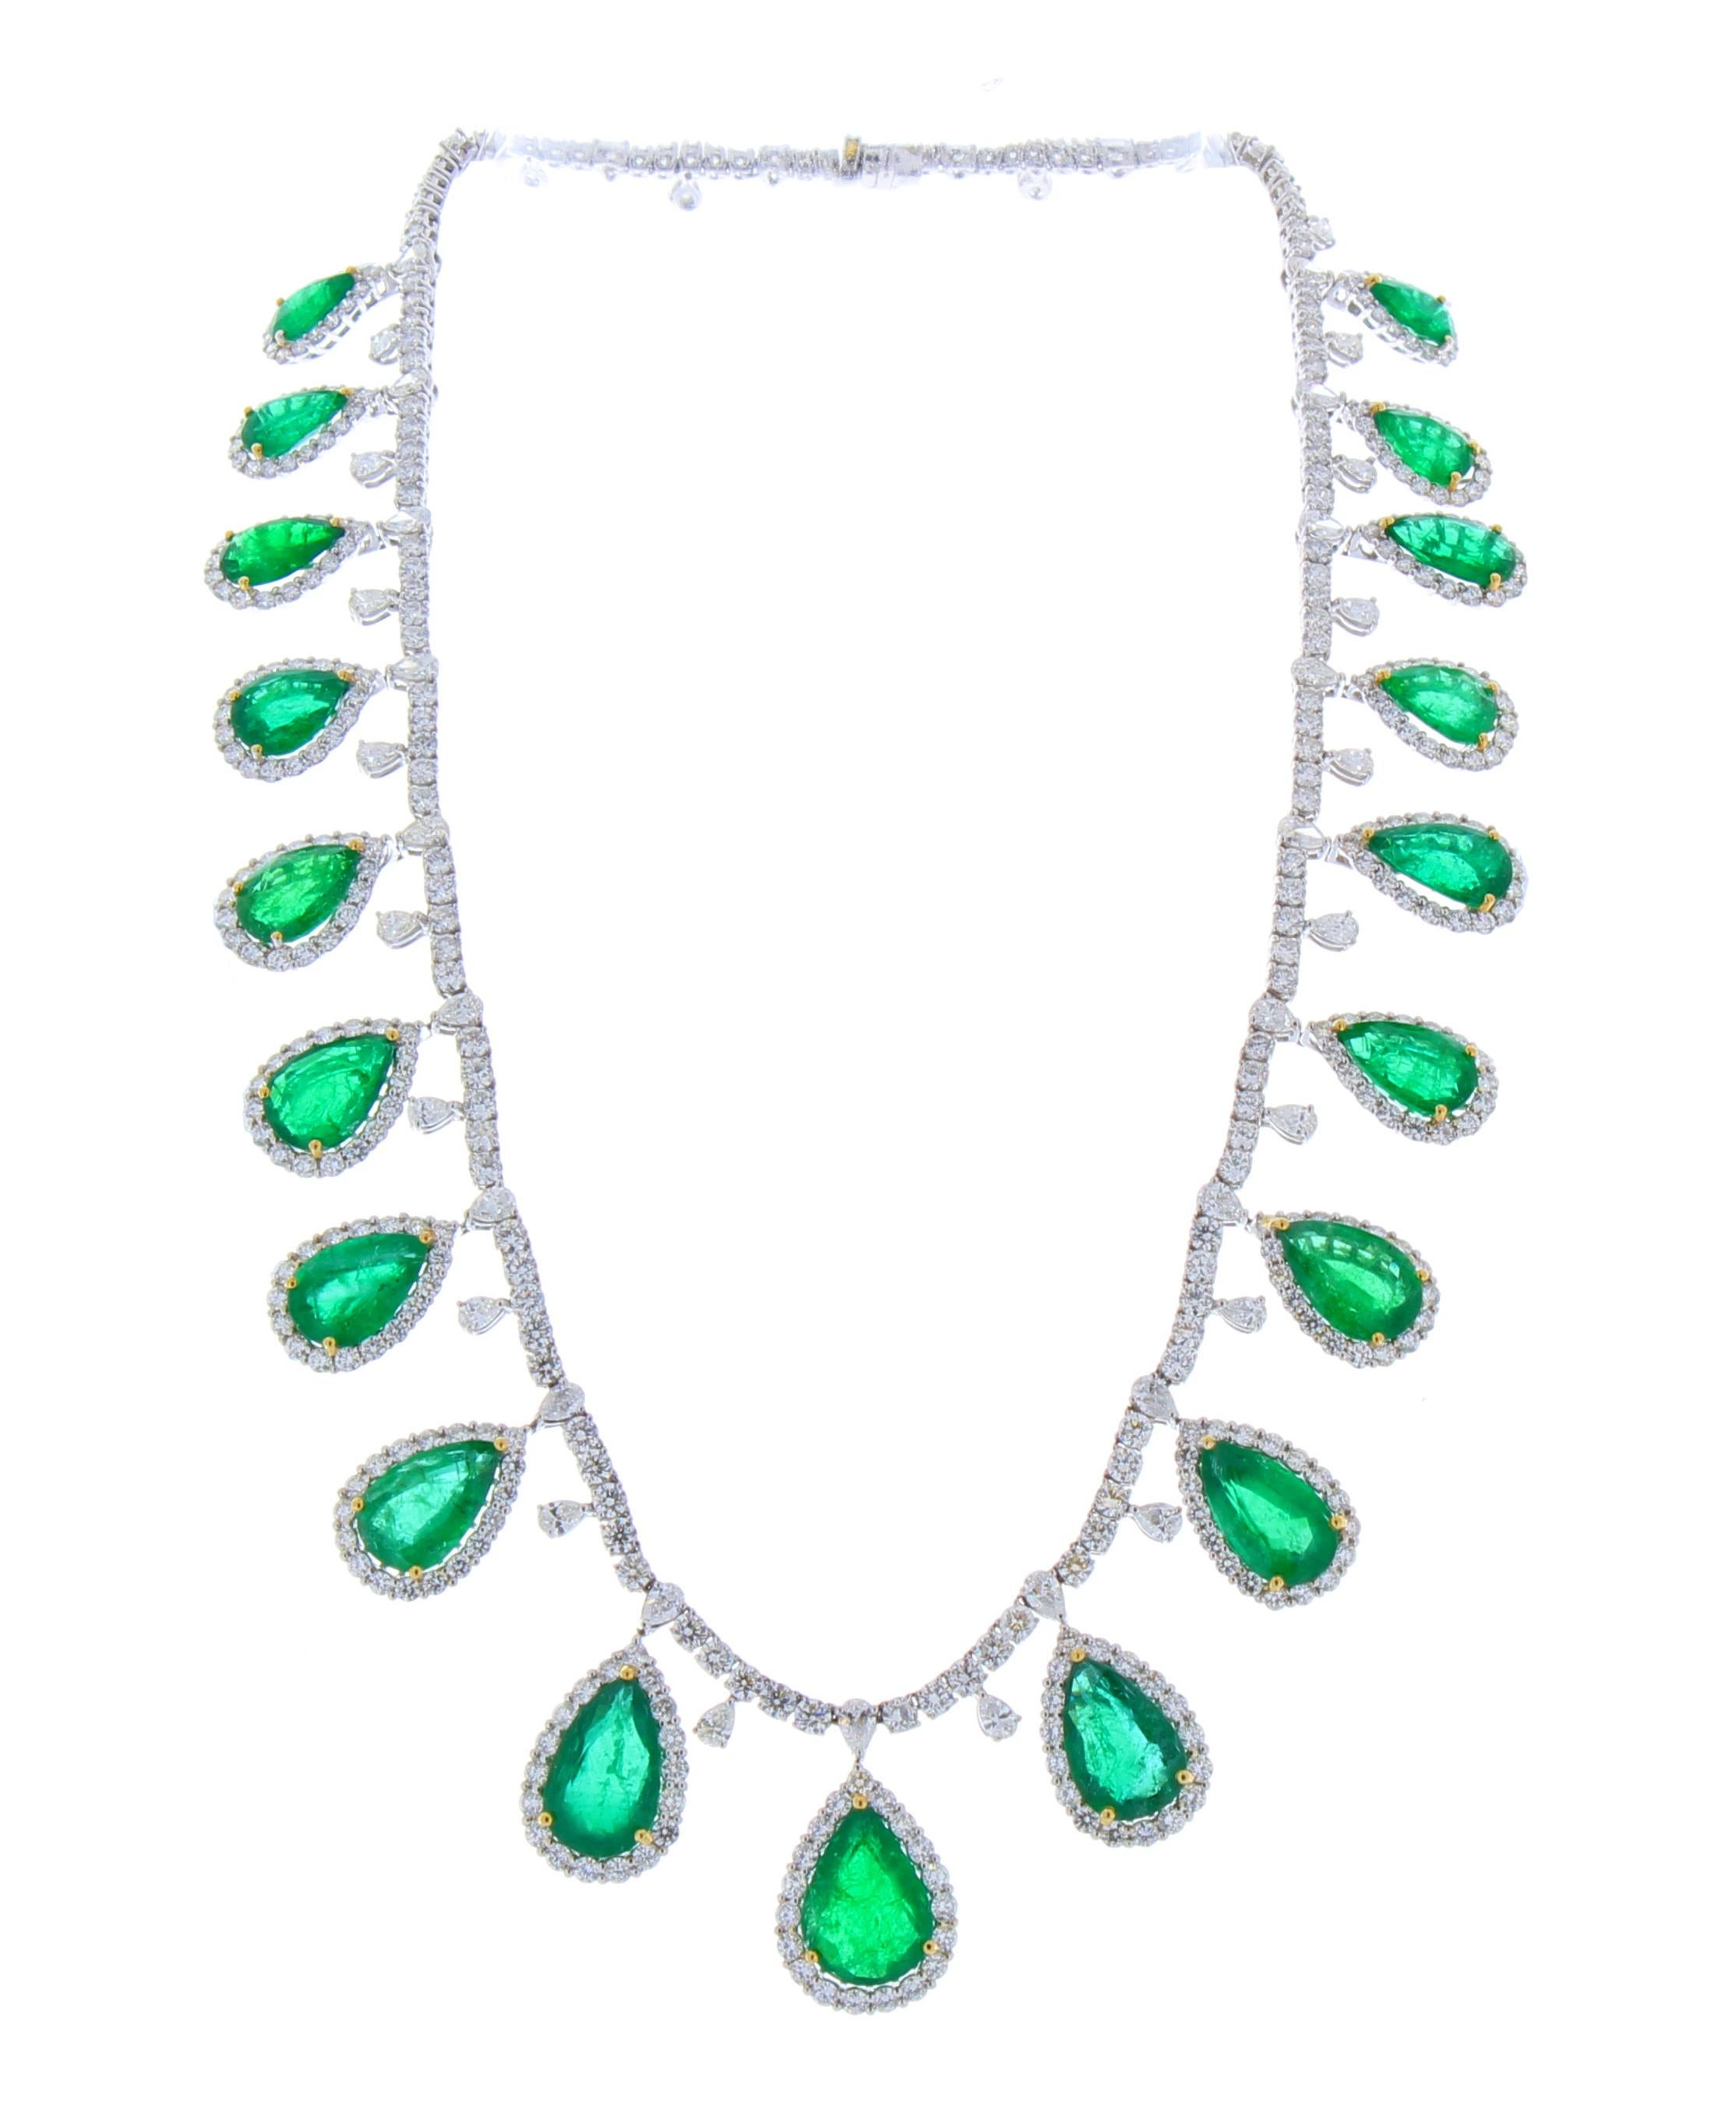 Pear Cut 50.34 Carat Total Pear Shaped Emerald and Diamond Necklace in 18 Karat Gold